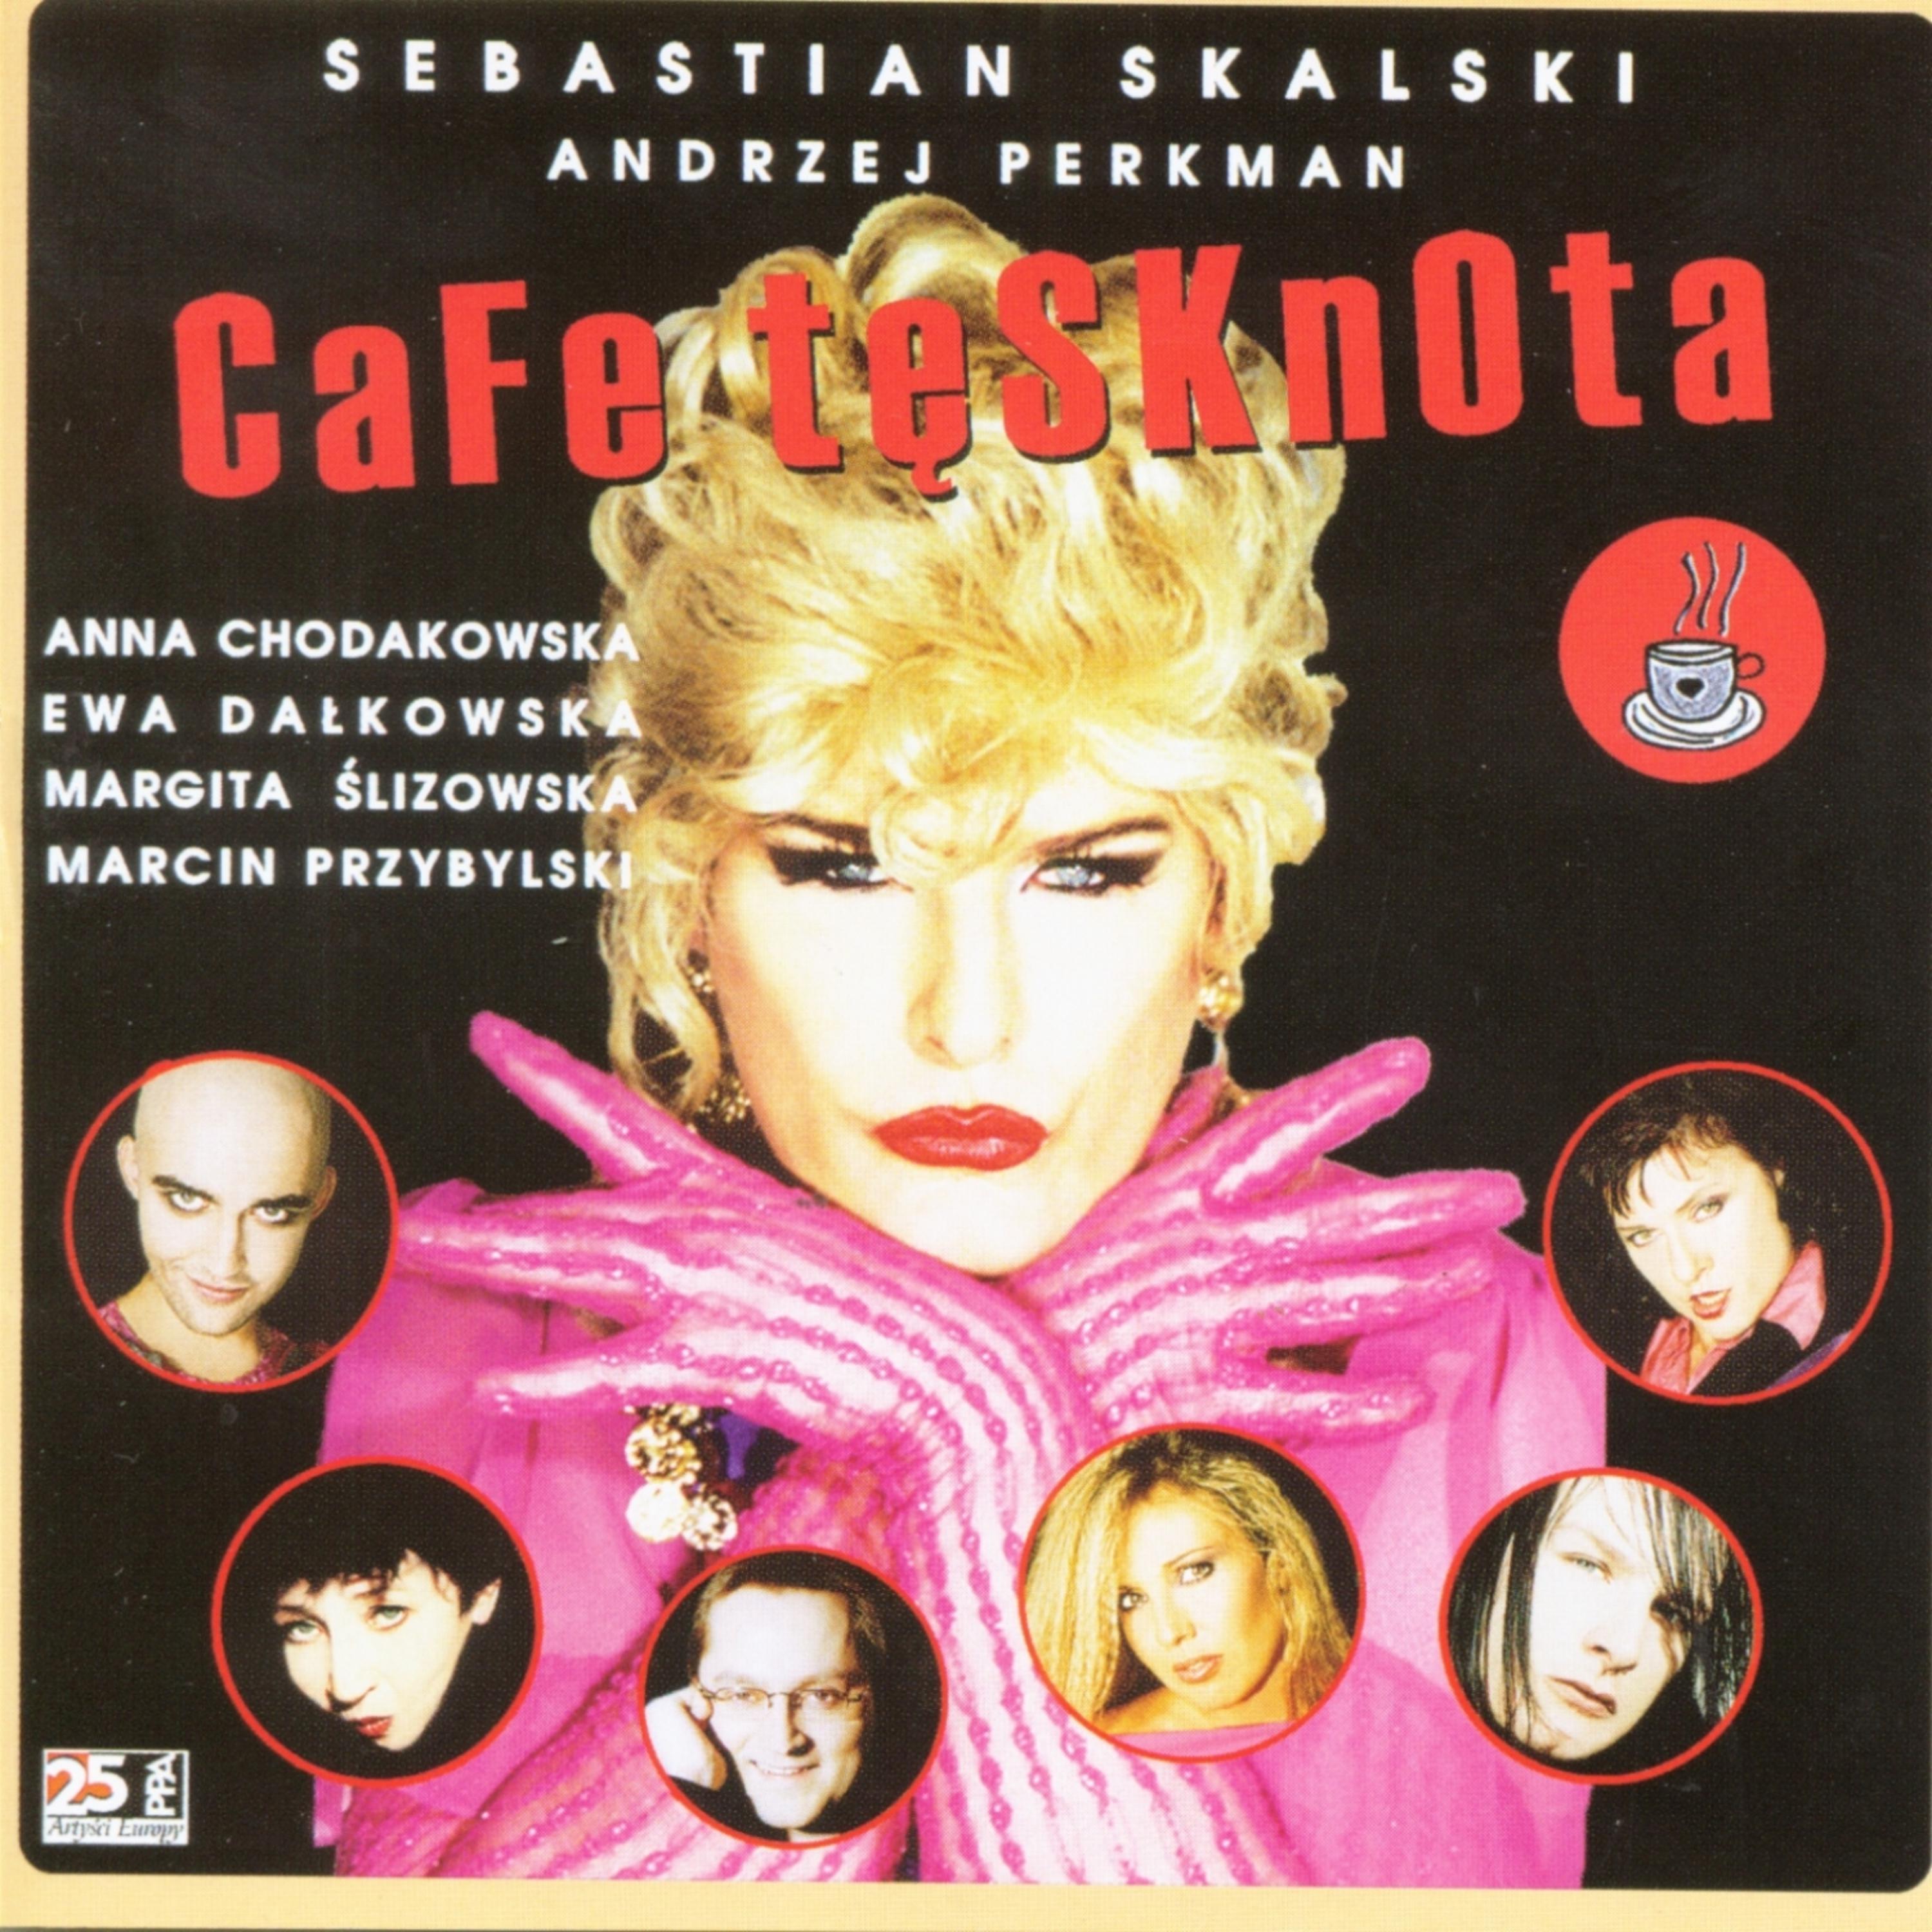 Постер альбома CaFe longing, CaFe tesknota - songs from a musical inspired by Pedro Almodovar movies